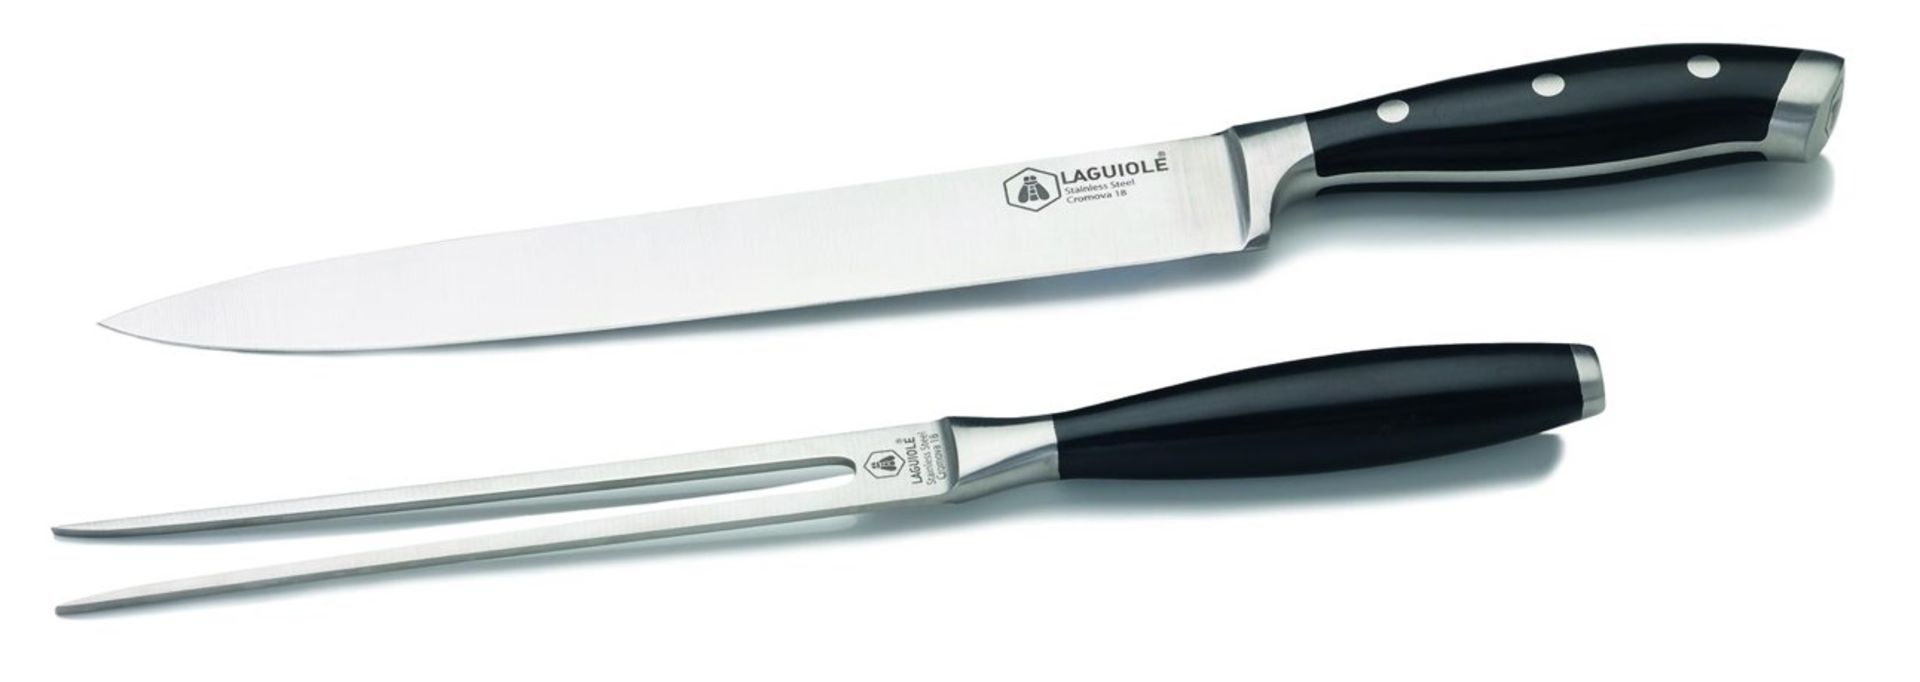 + VAT Brand New Laguiole Carving Set with Carving Knife and Meat Fork - Amazon price £24.99